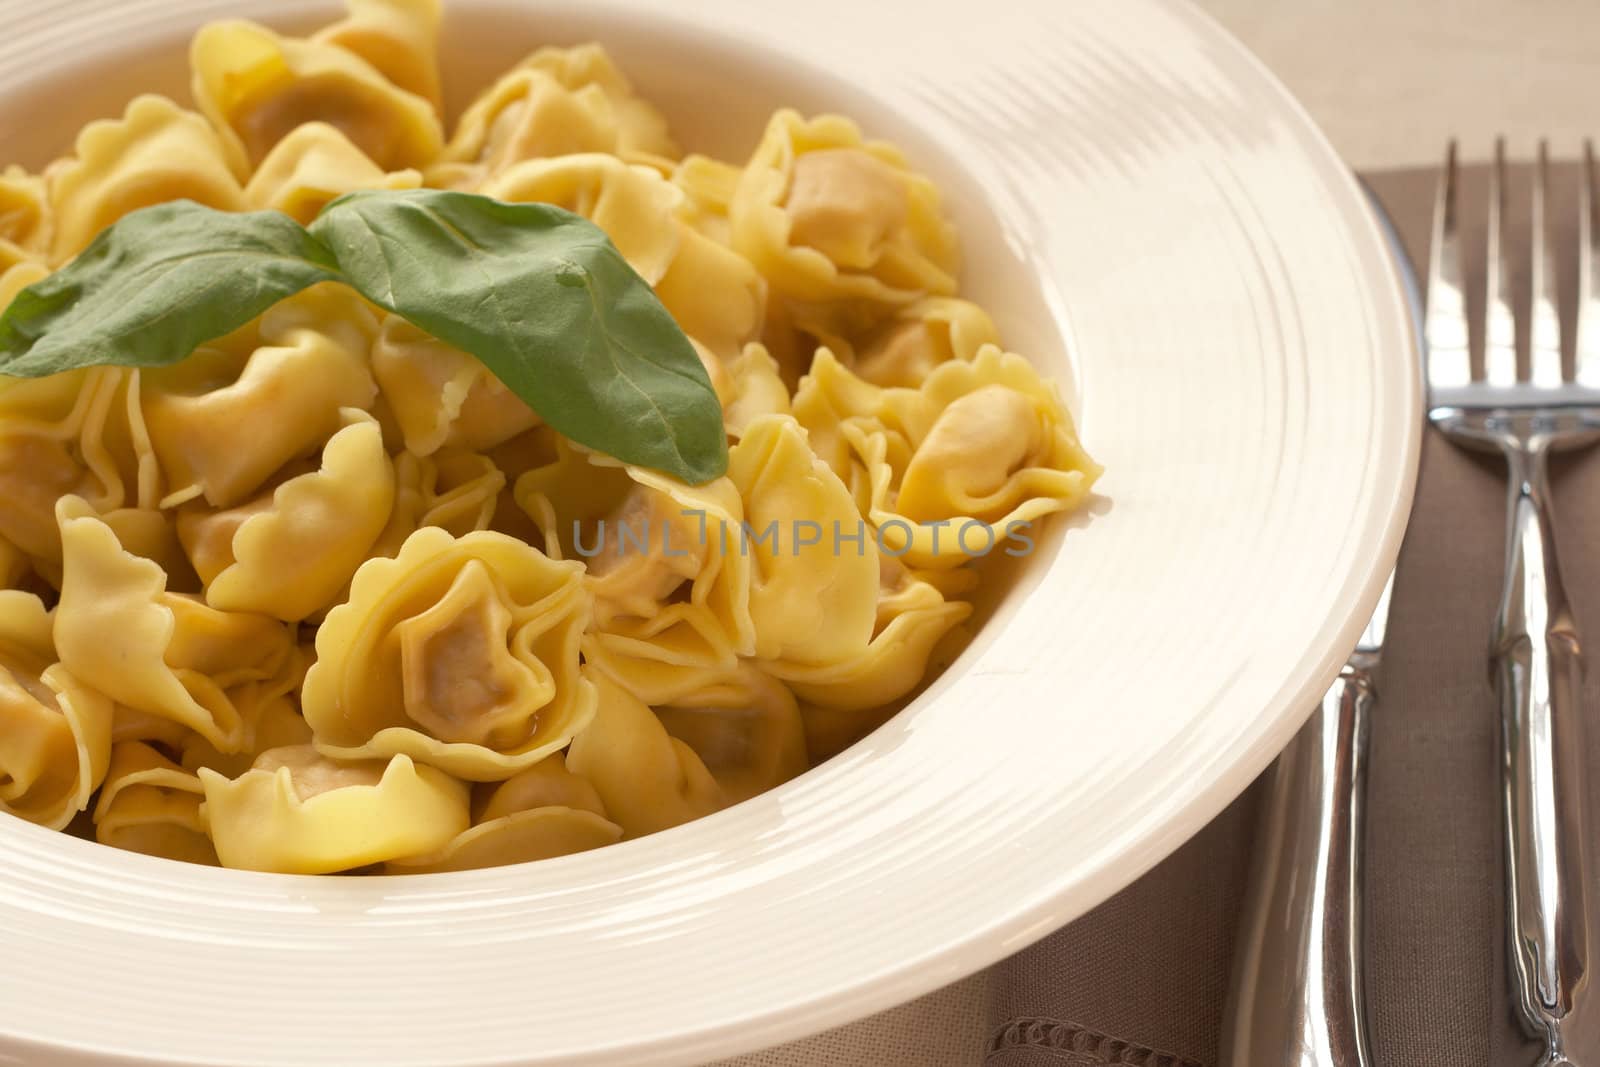 Plate of Italian bolognese tortelloni, fresh egg pasta made with durum wheat, with fresh basil leaves